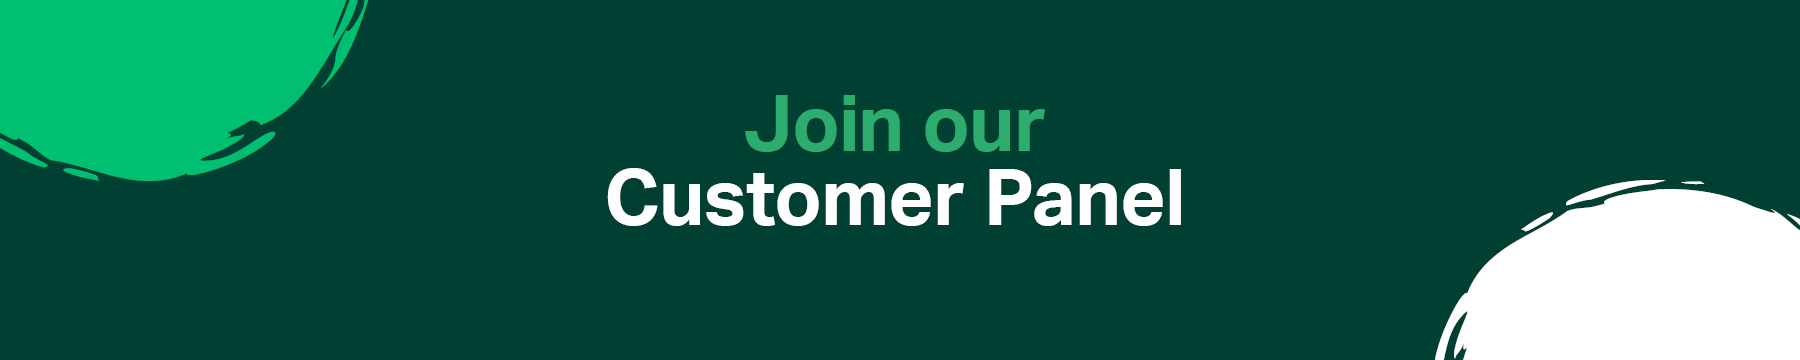 Join our Customer Panel